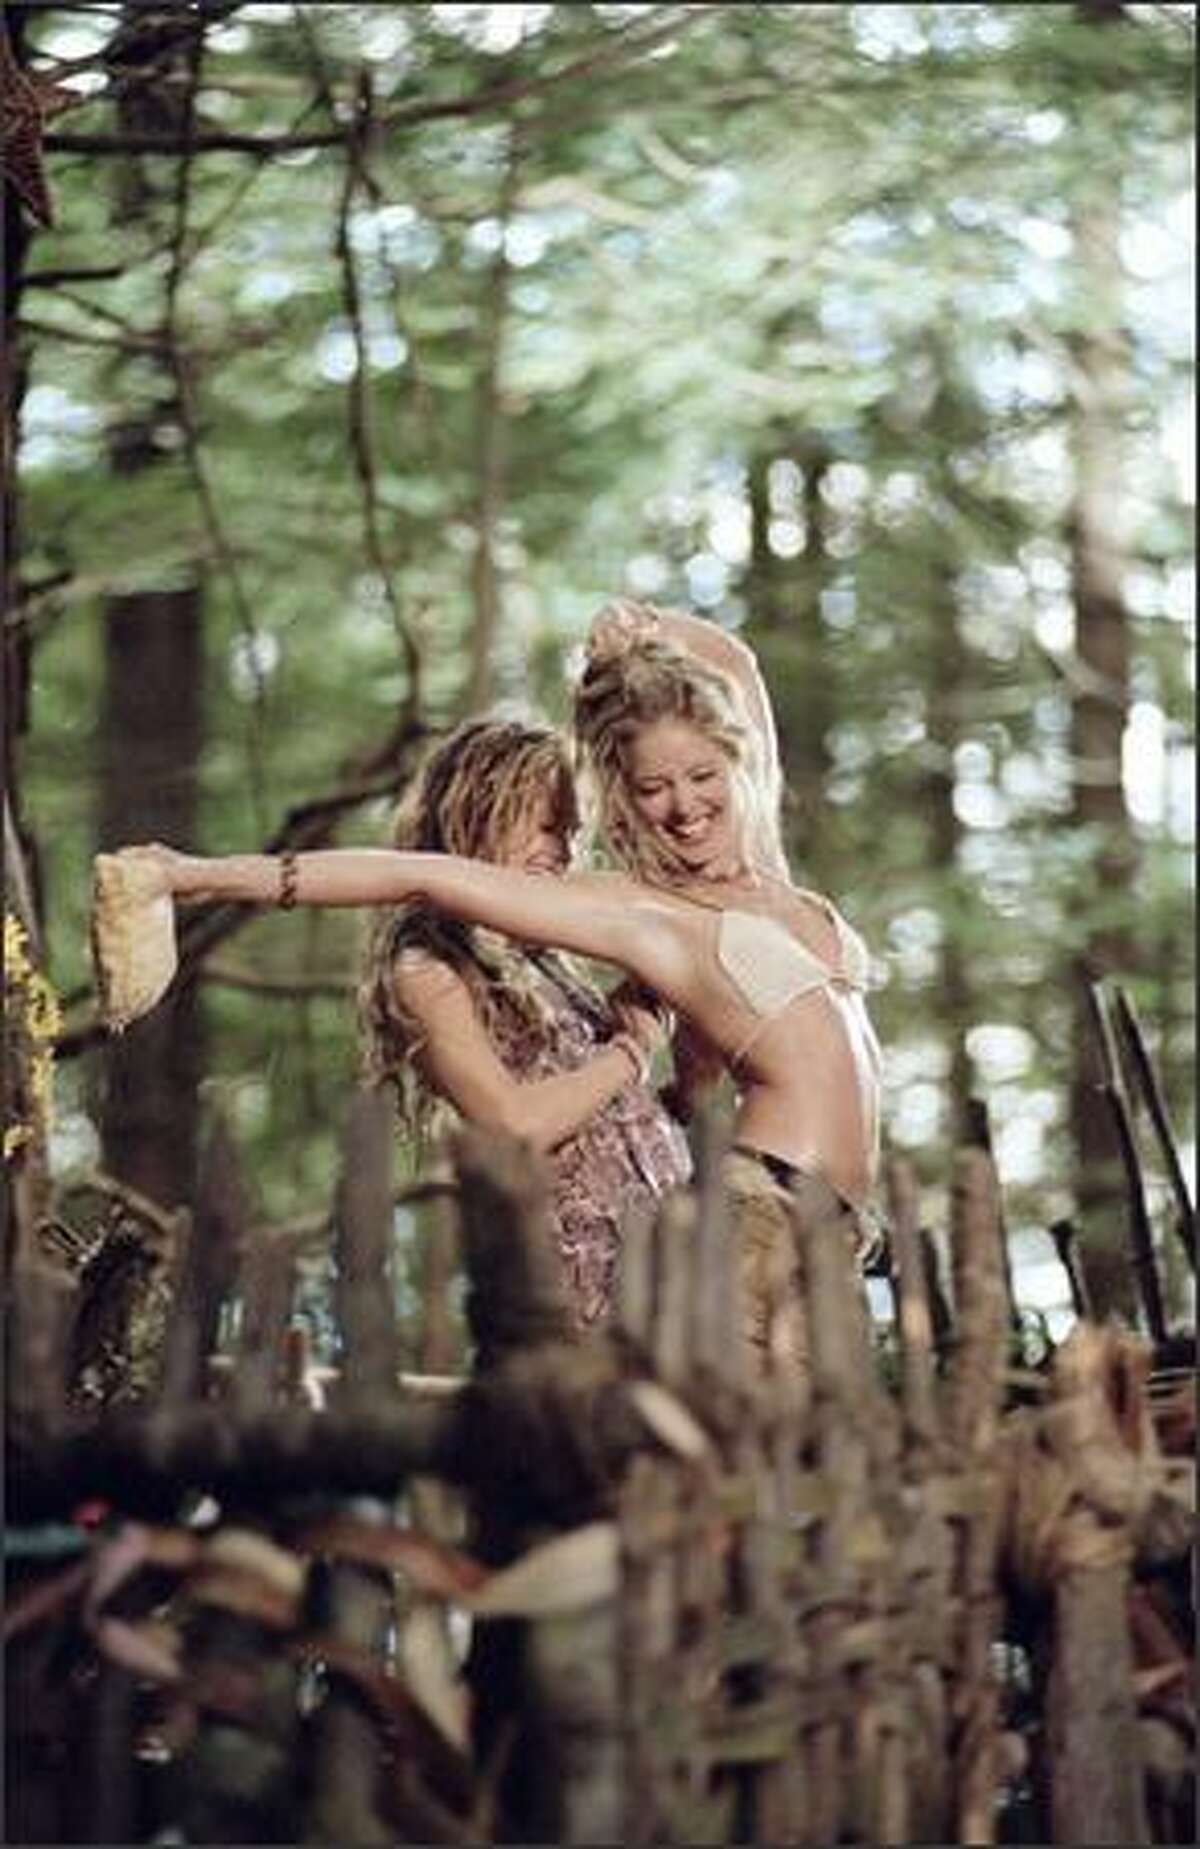 Rachel Blanchard as Flower (left) and Christina Moore as Butterfly are two of the backwoods characters who disrupt the three friends' expedition.